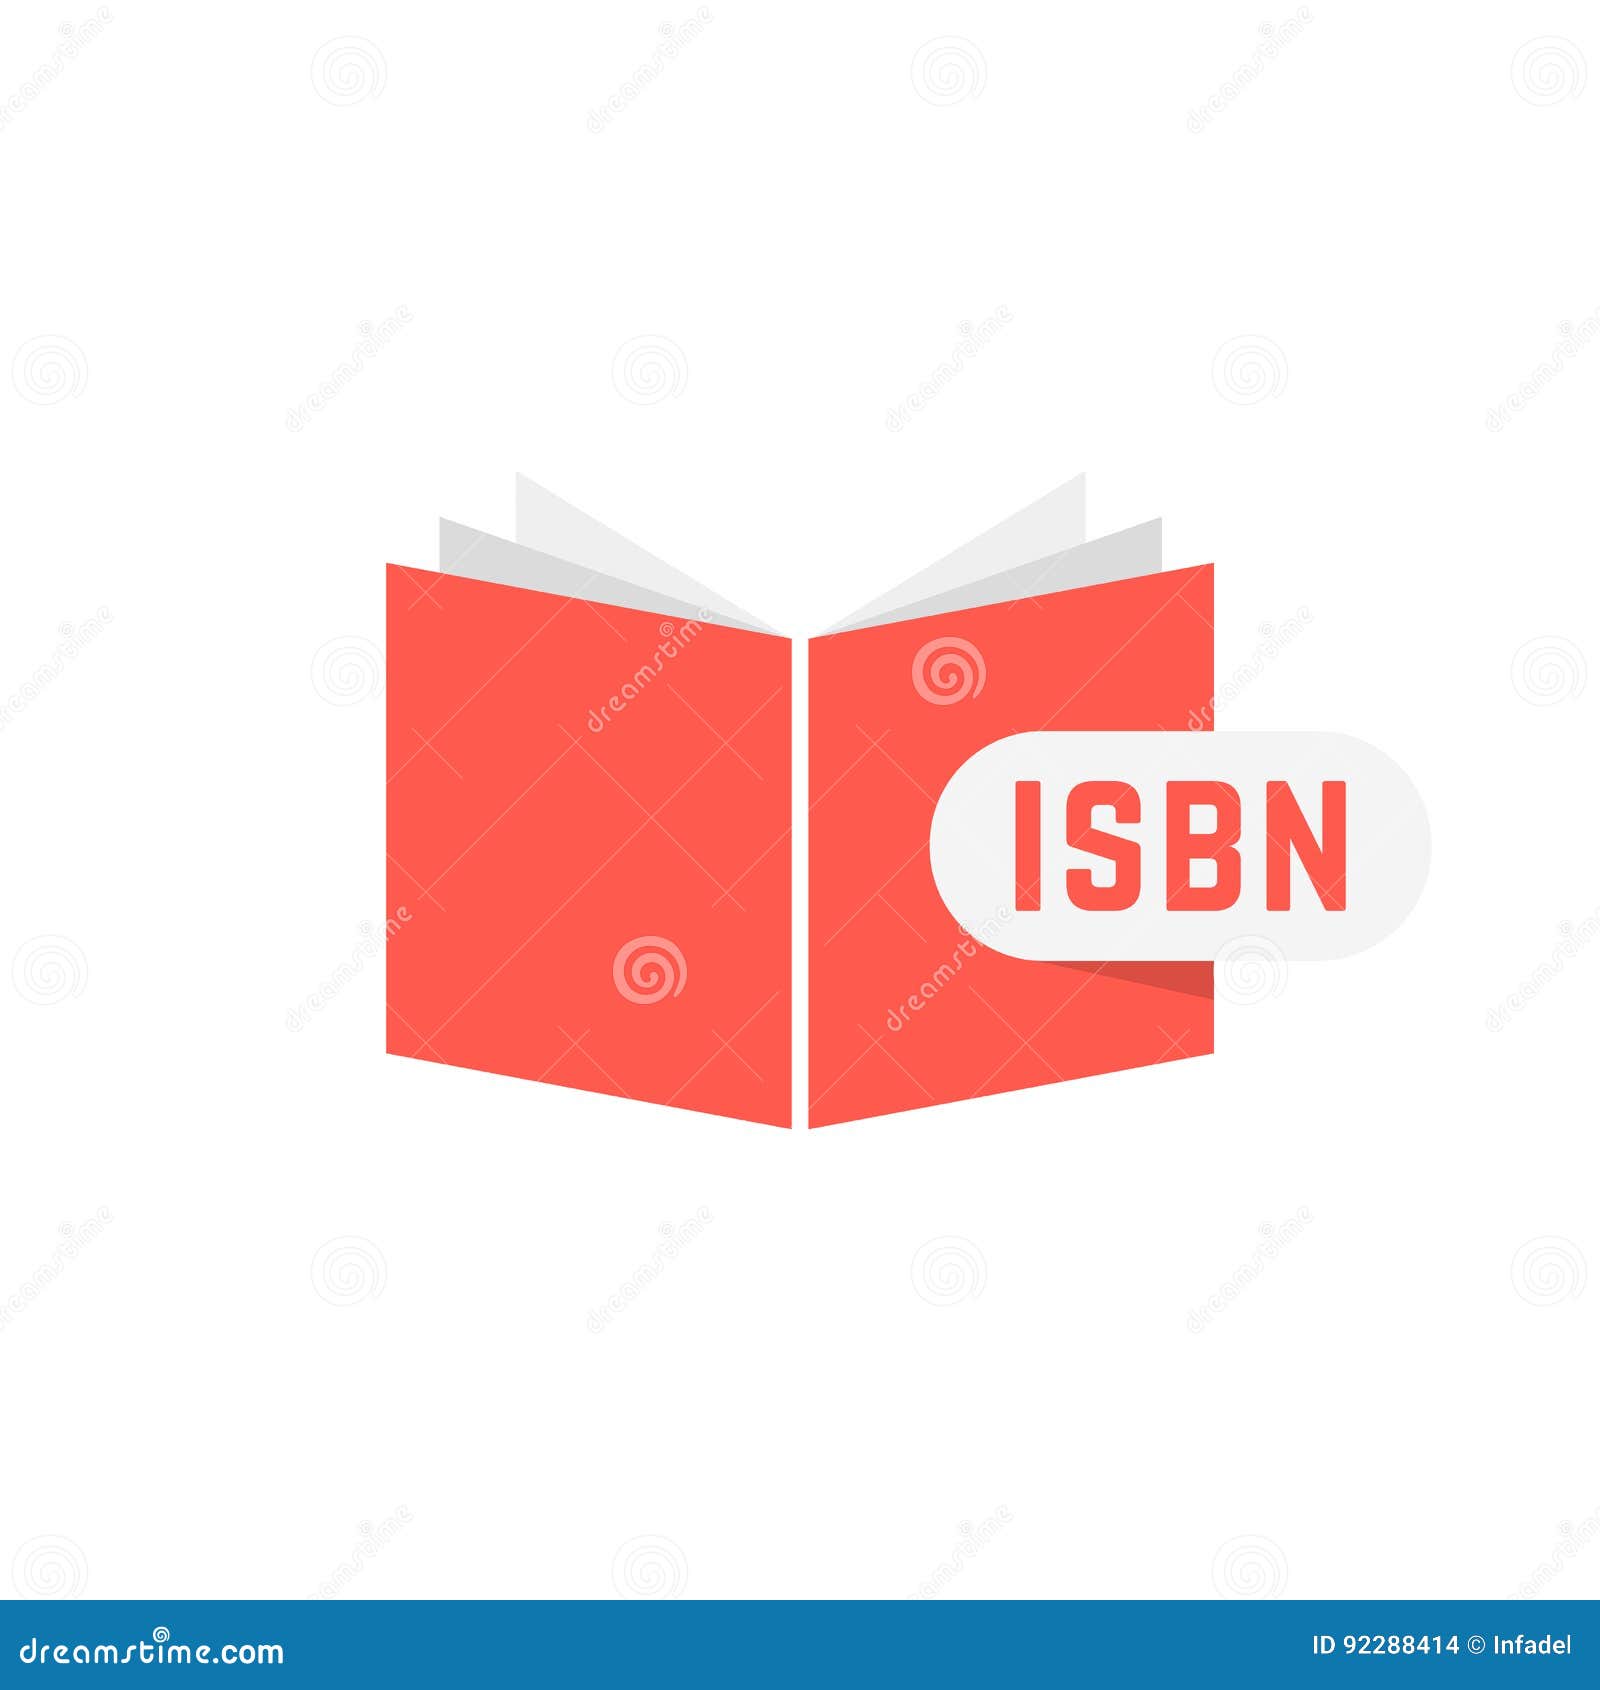 isbn sign with red book